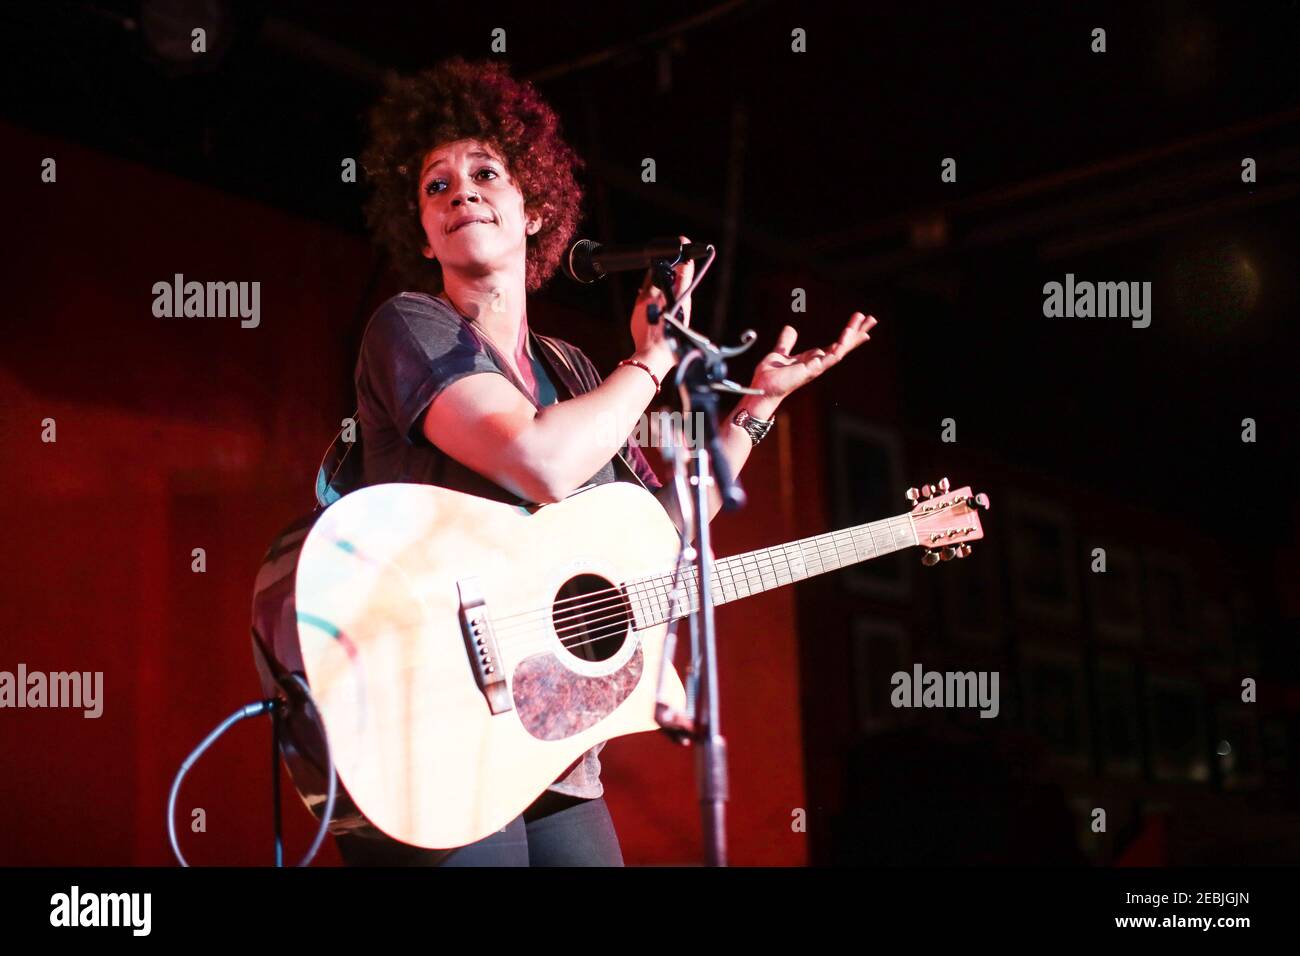 Chastity Brown performing on stage at the iconic 100 Club in London's Oxford Street Stock Photo